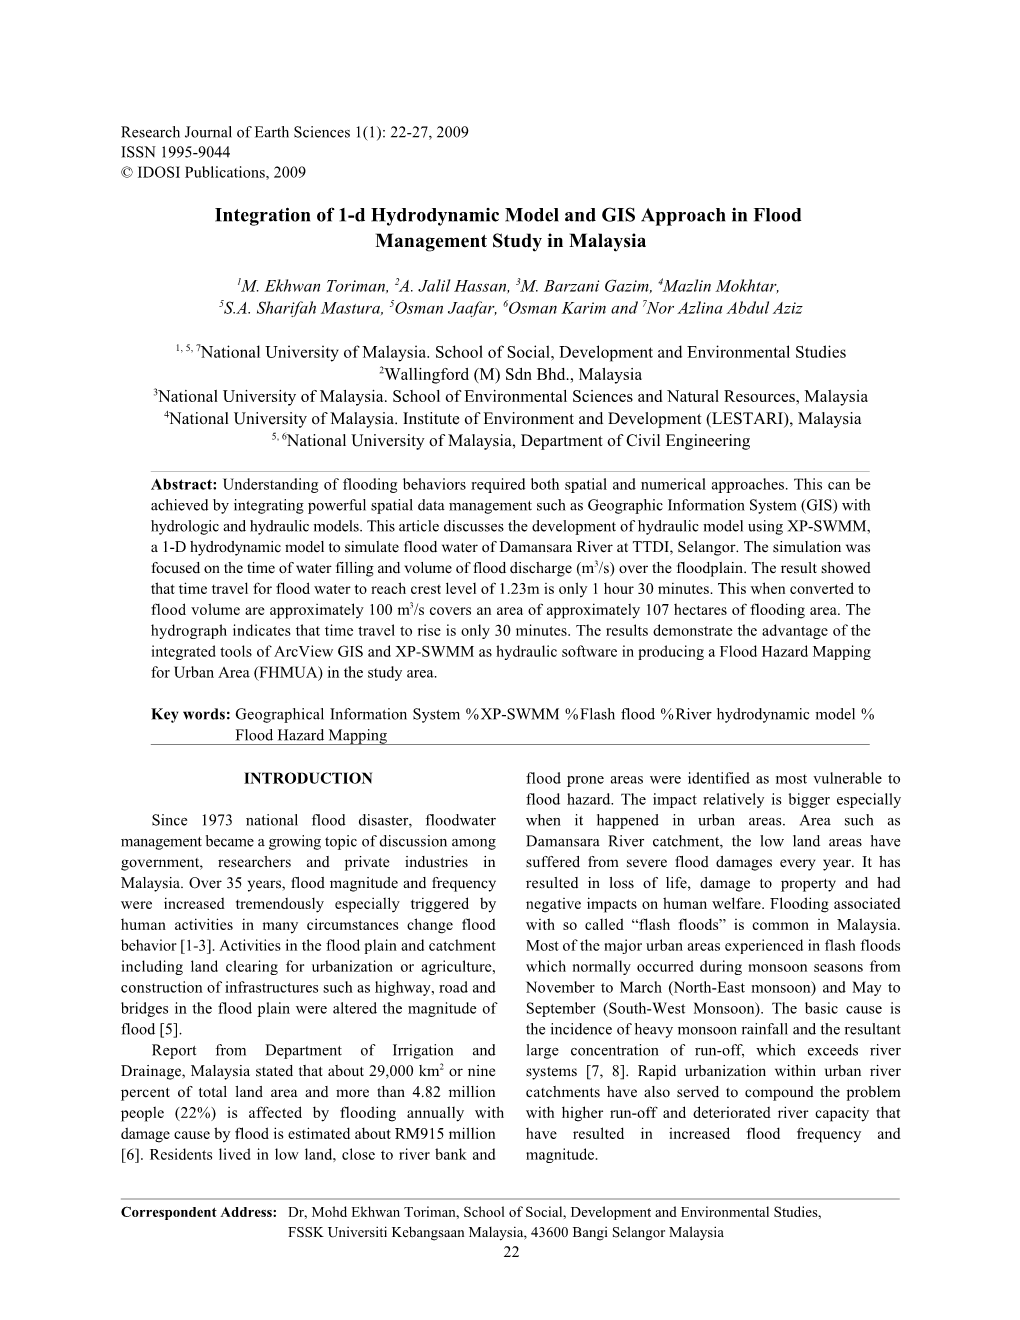 Integration of 1-D Hydrodynamic Model and GIS Approach in Flood Management Study in Malaysia